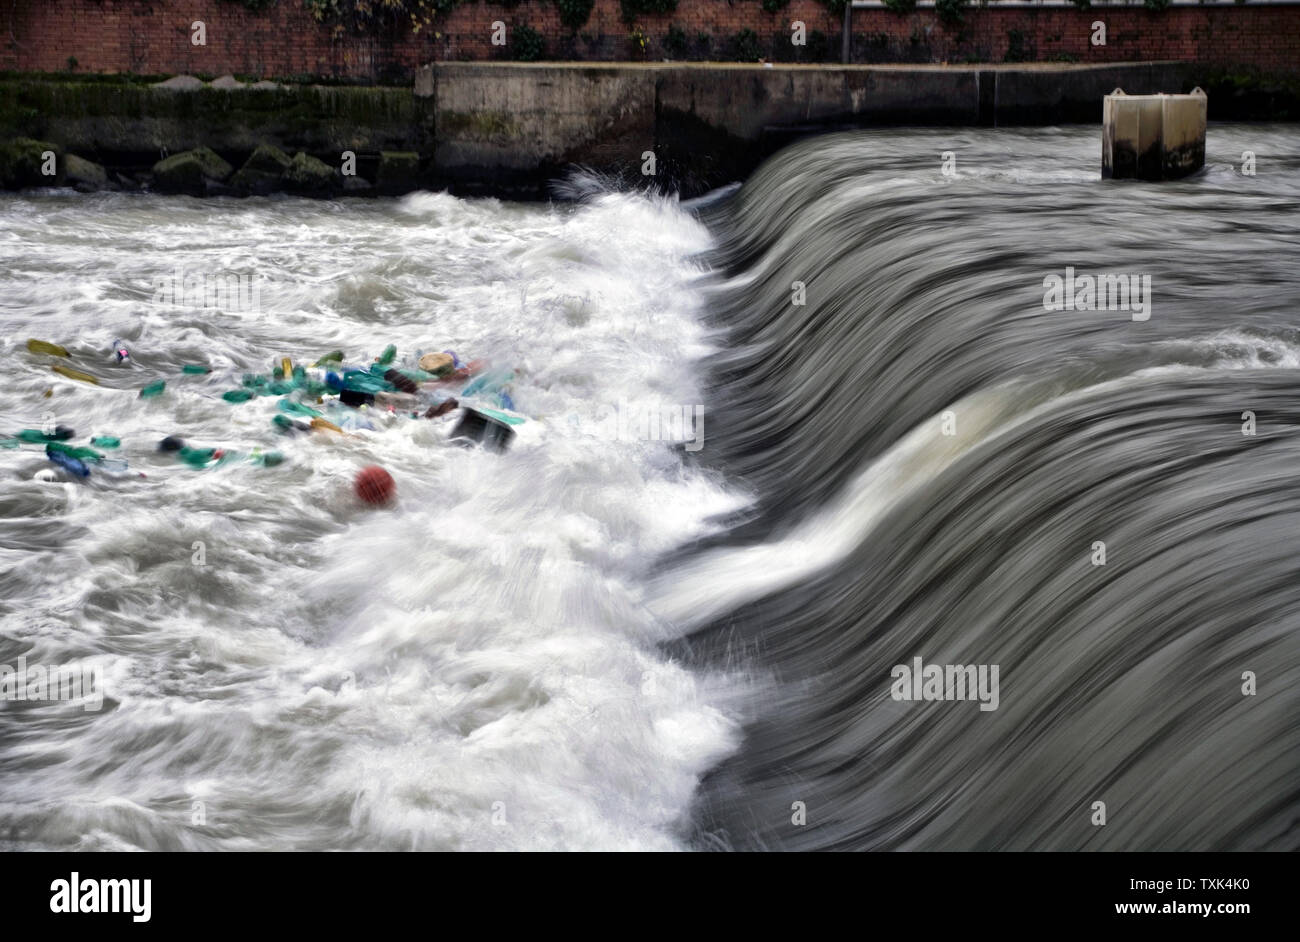 Plastic bottles and garbage floating on the River Tevere, Rome, Italy. Stock Photo